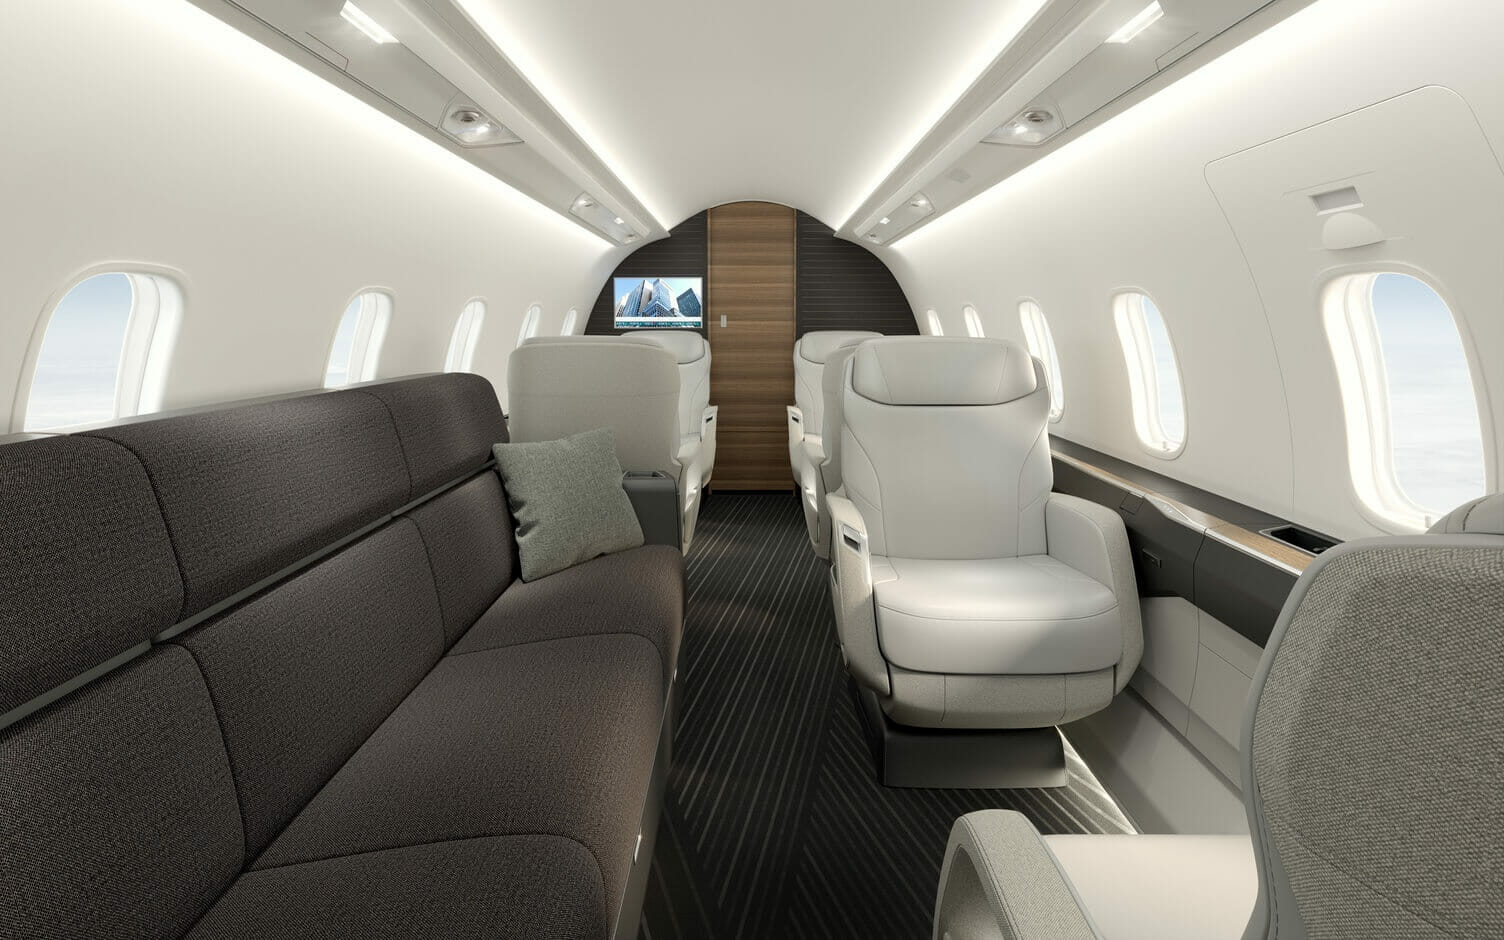 Bombardier Challenger 3500 Interior of full cabin with divan / sofa